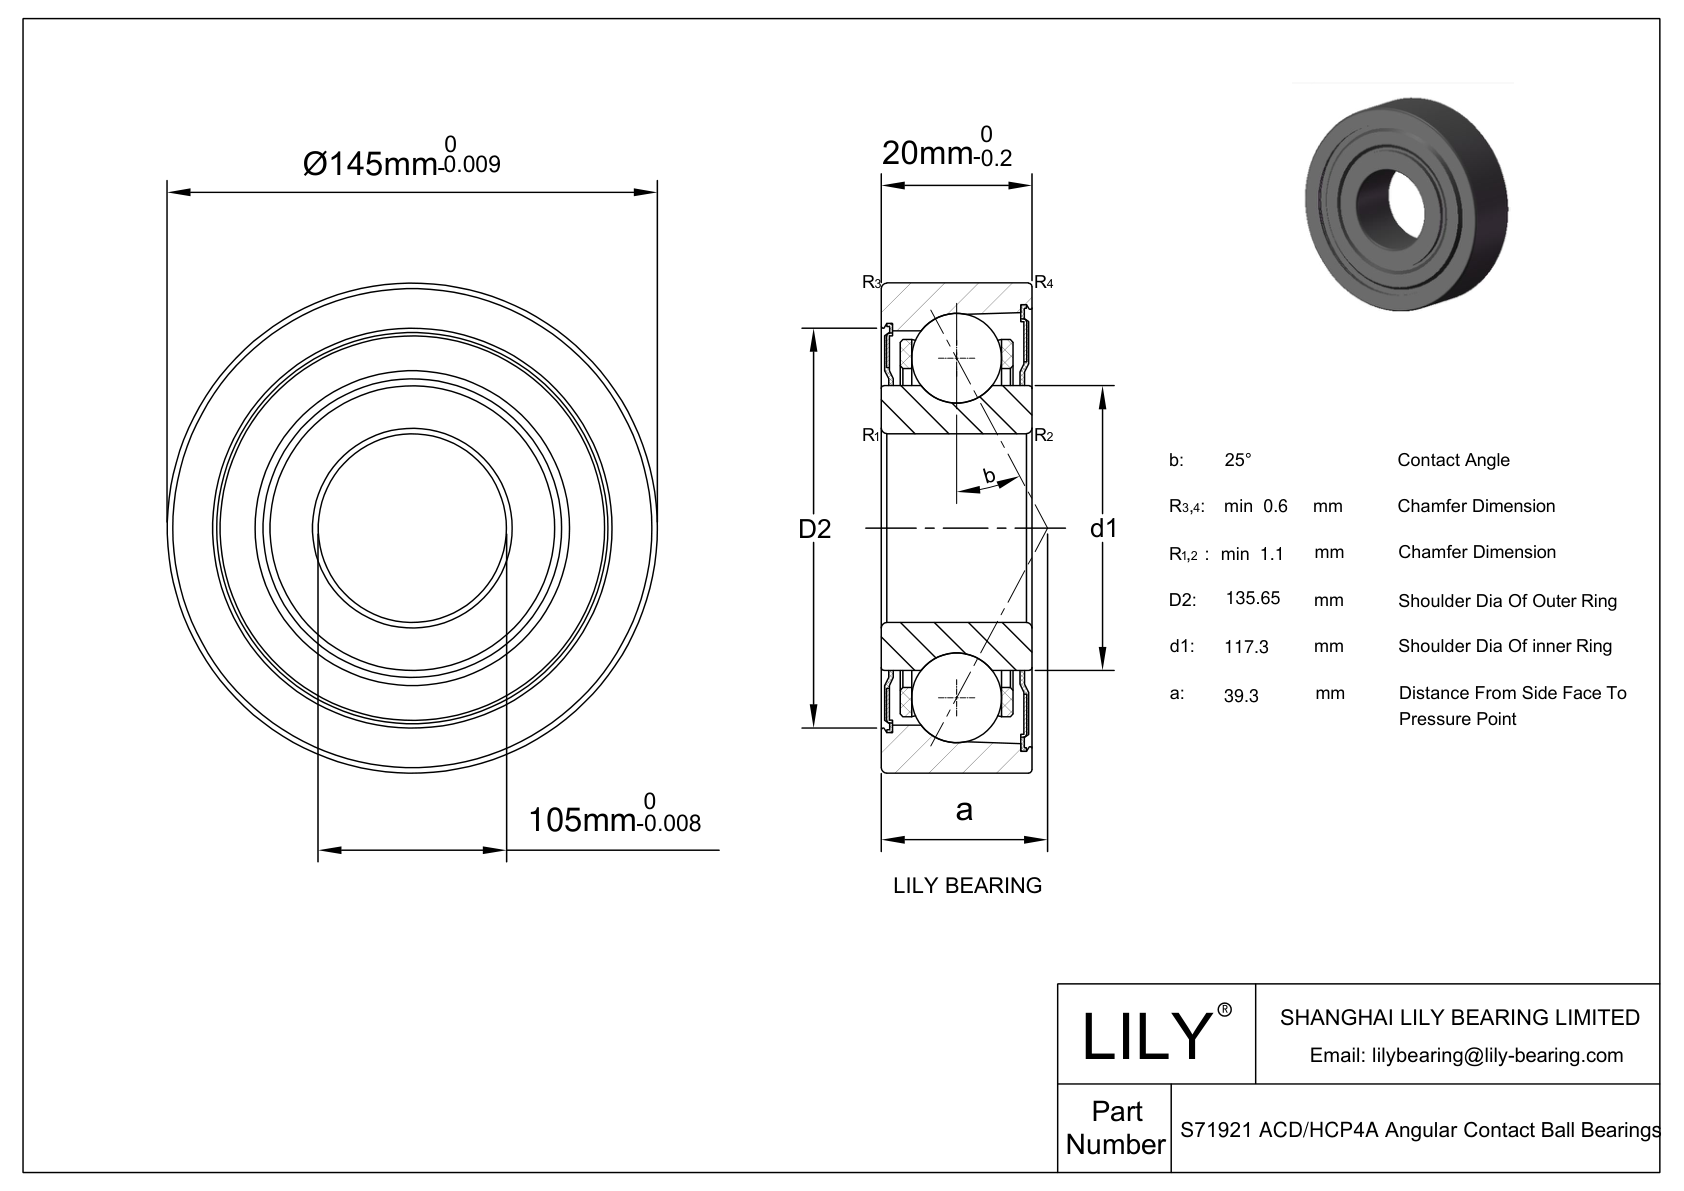 S71921 ACD/HCP4A Super Precision Angular Contact Ball Bearings cad drawing